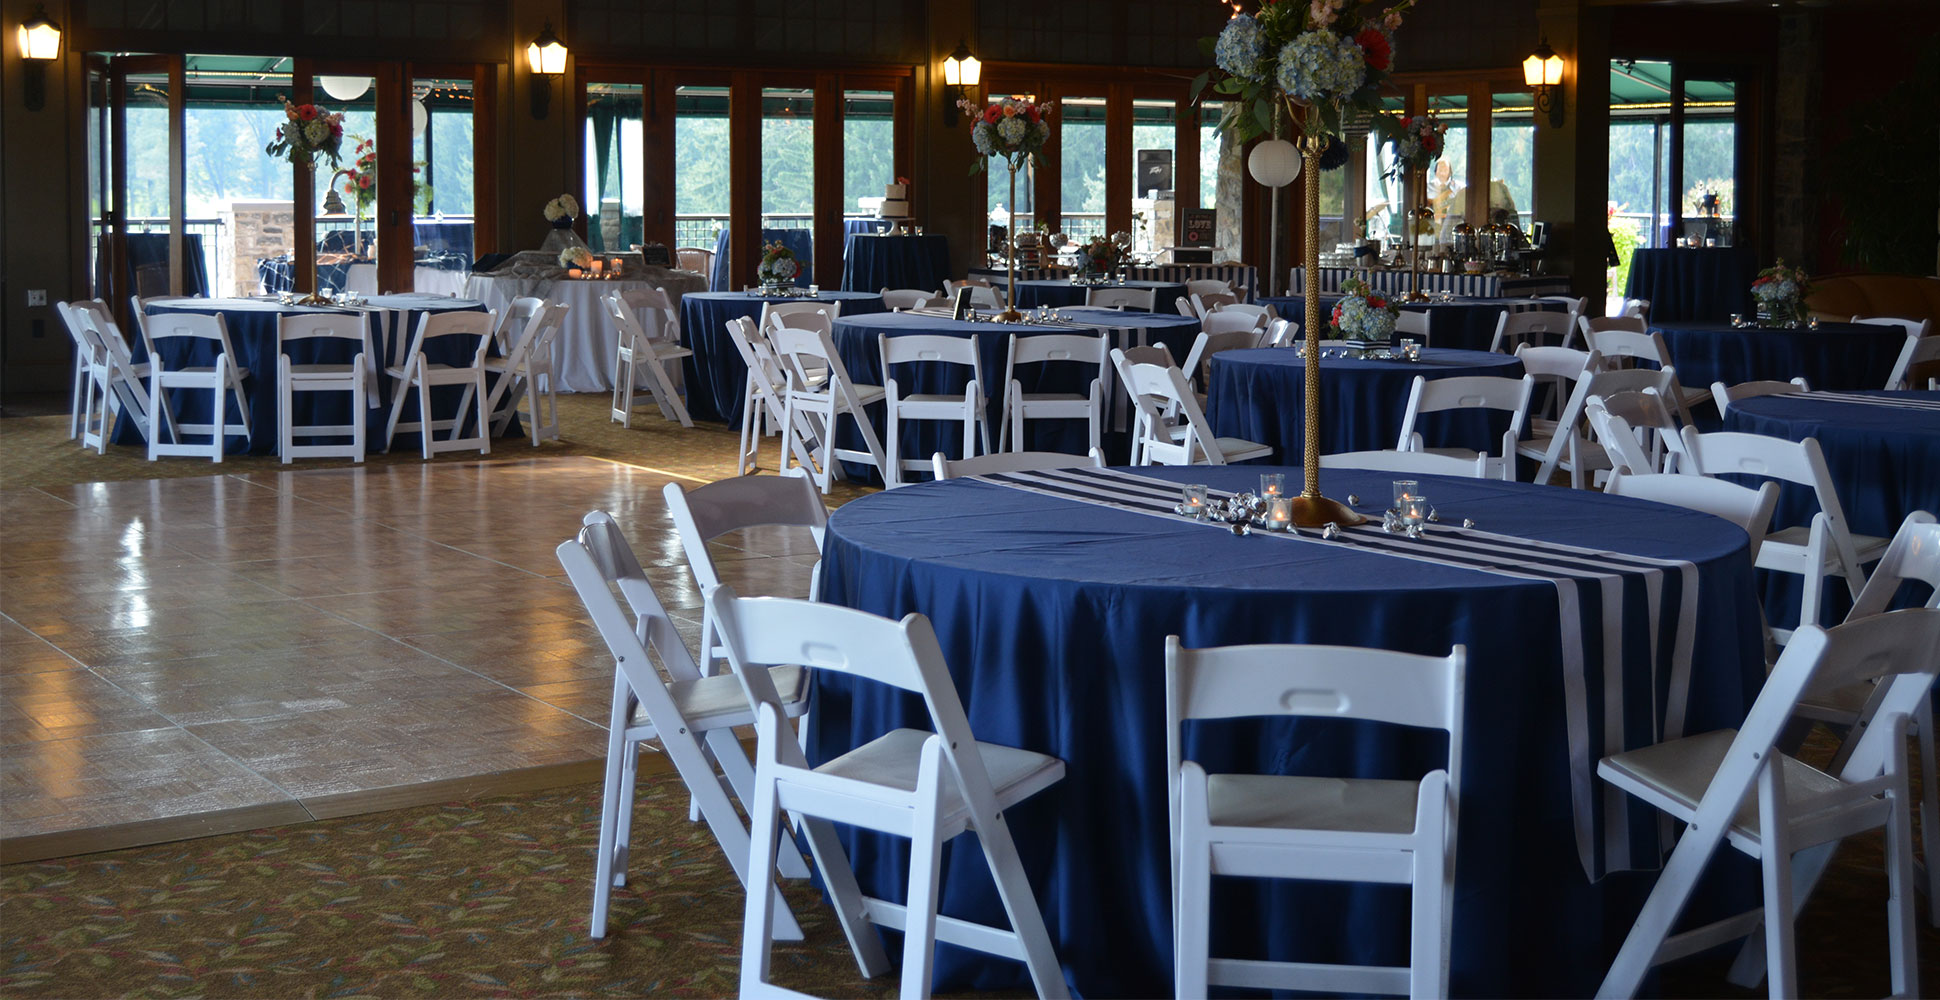 tables set for an event at Hershey Country Club